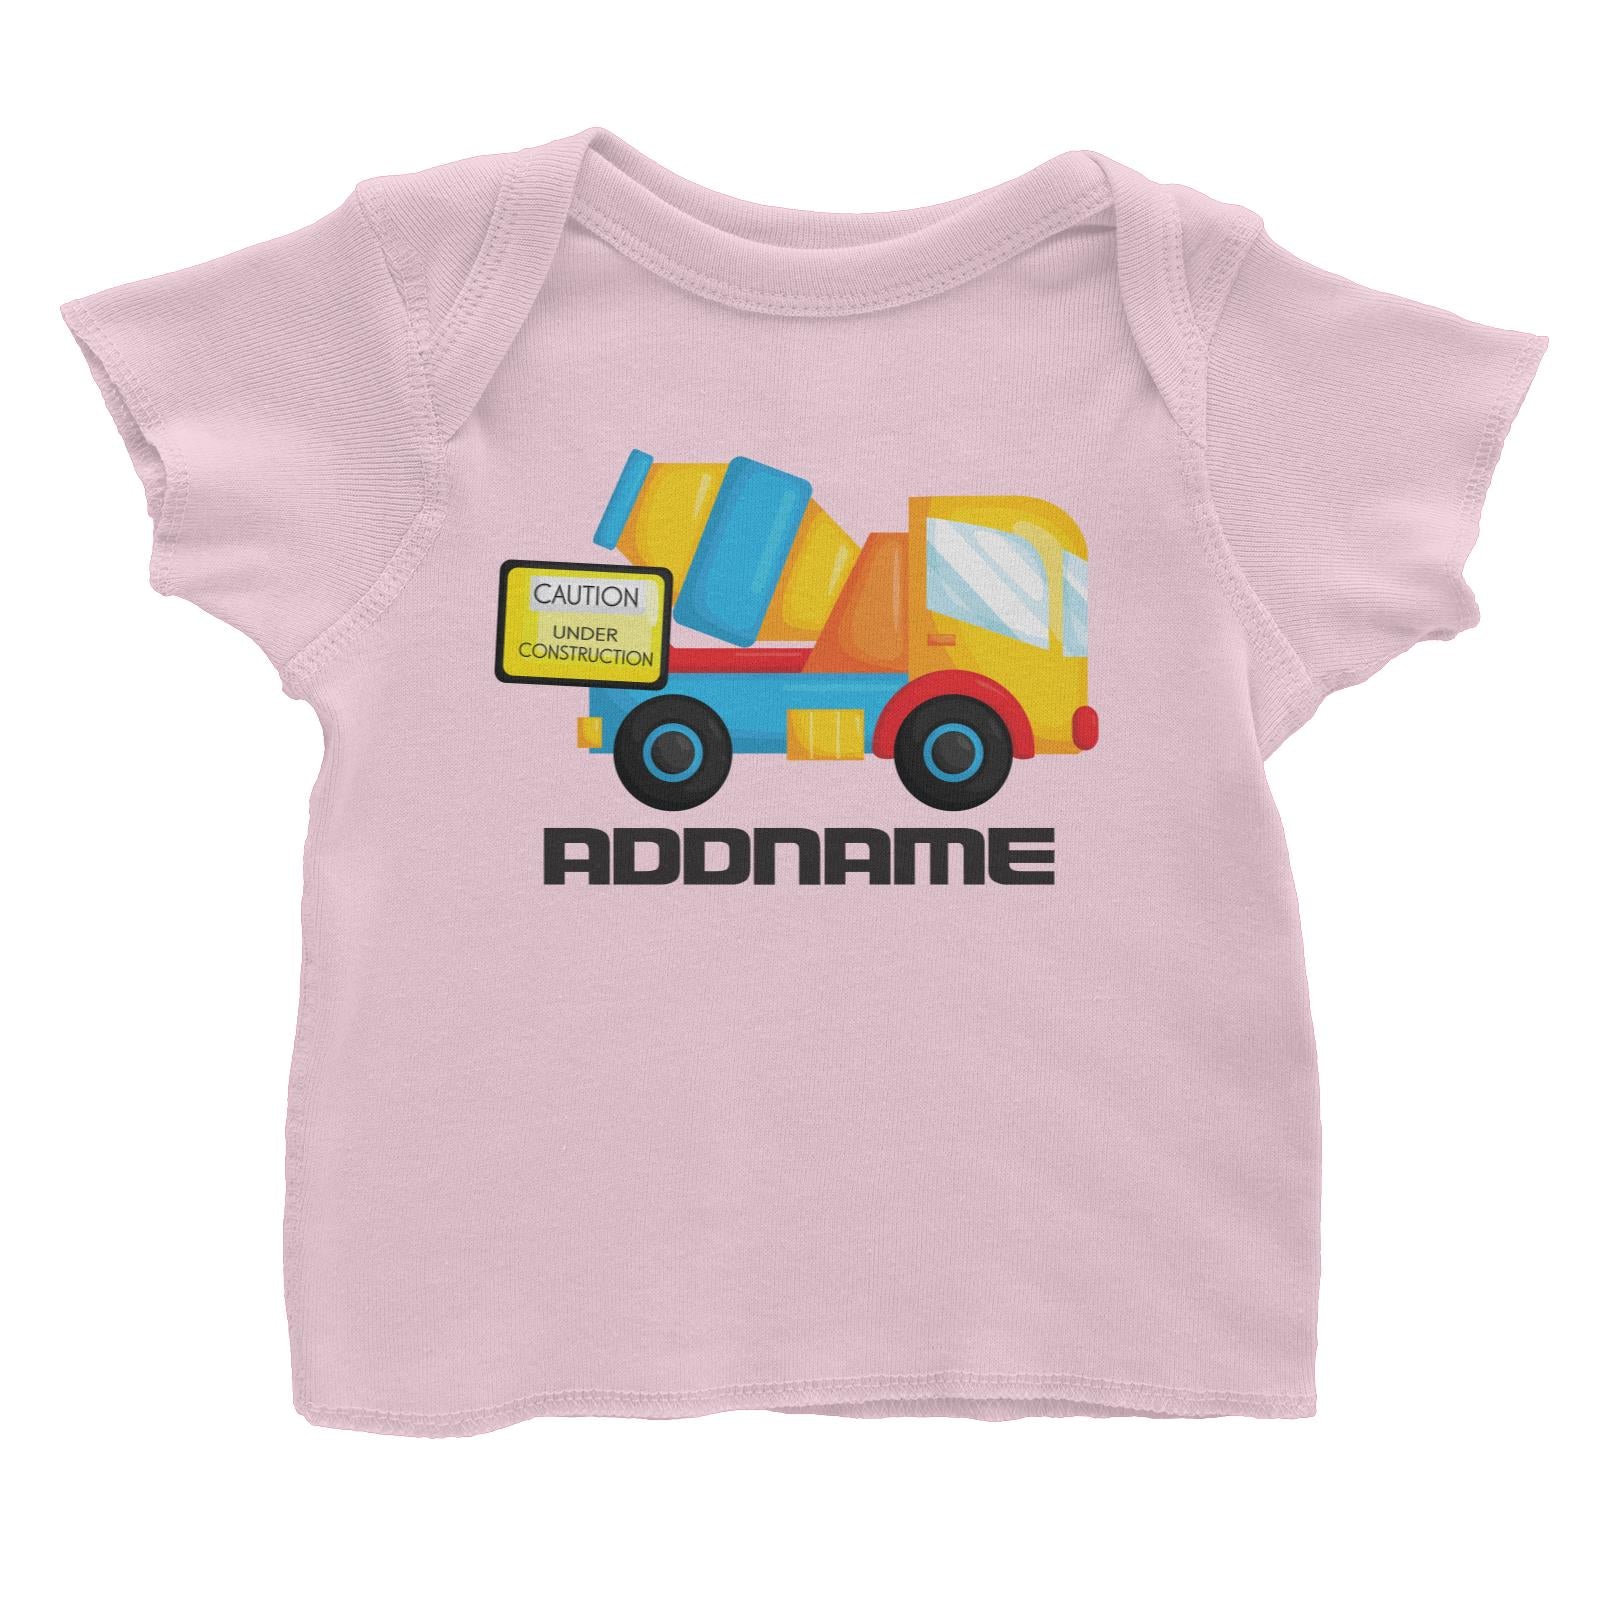 Birthday Construction Cement Mixer Addname Baby T-Shirt